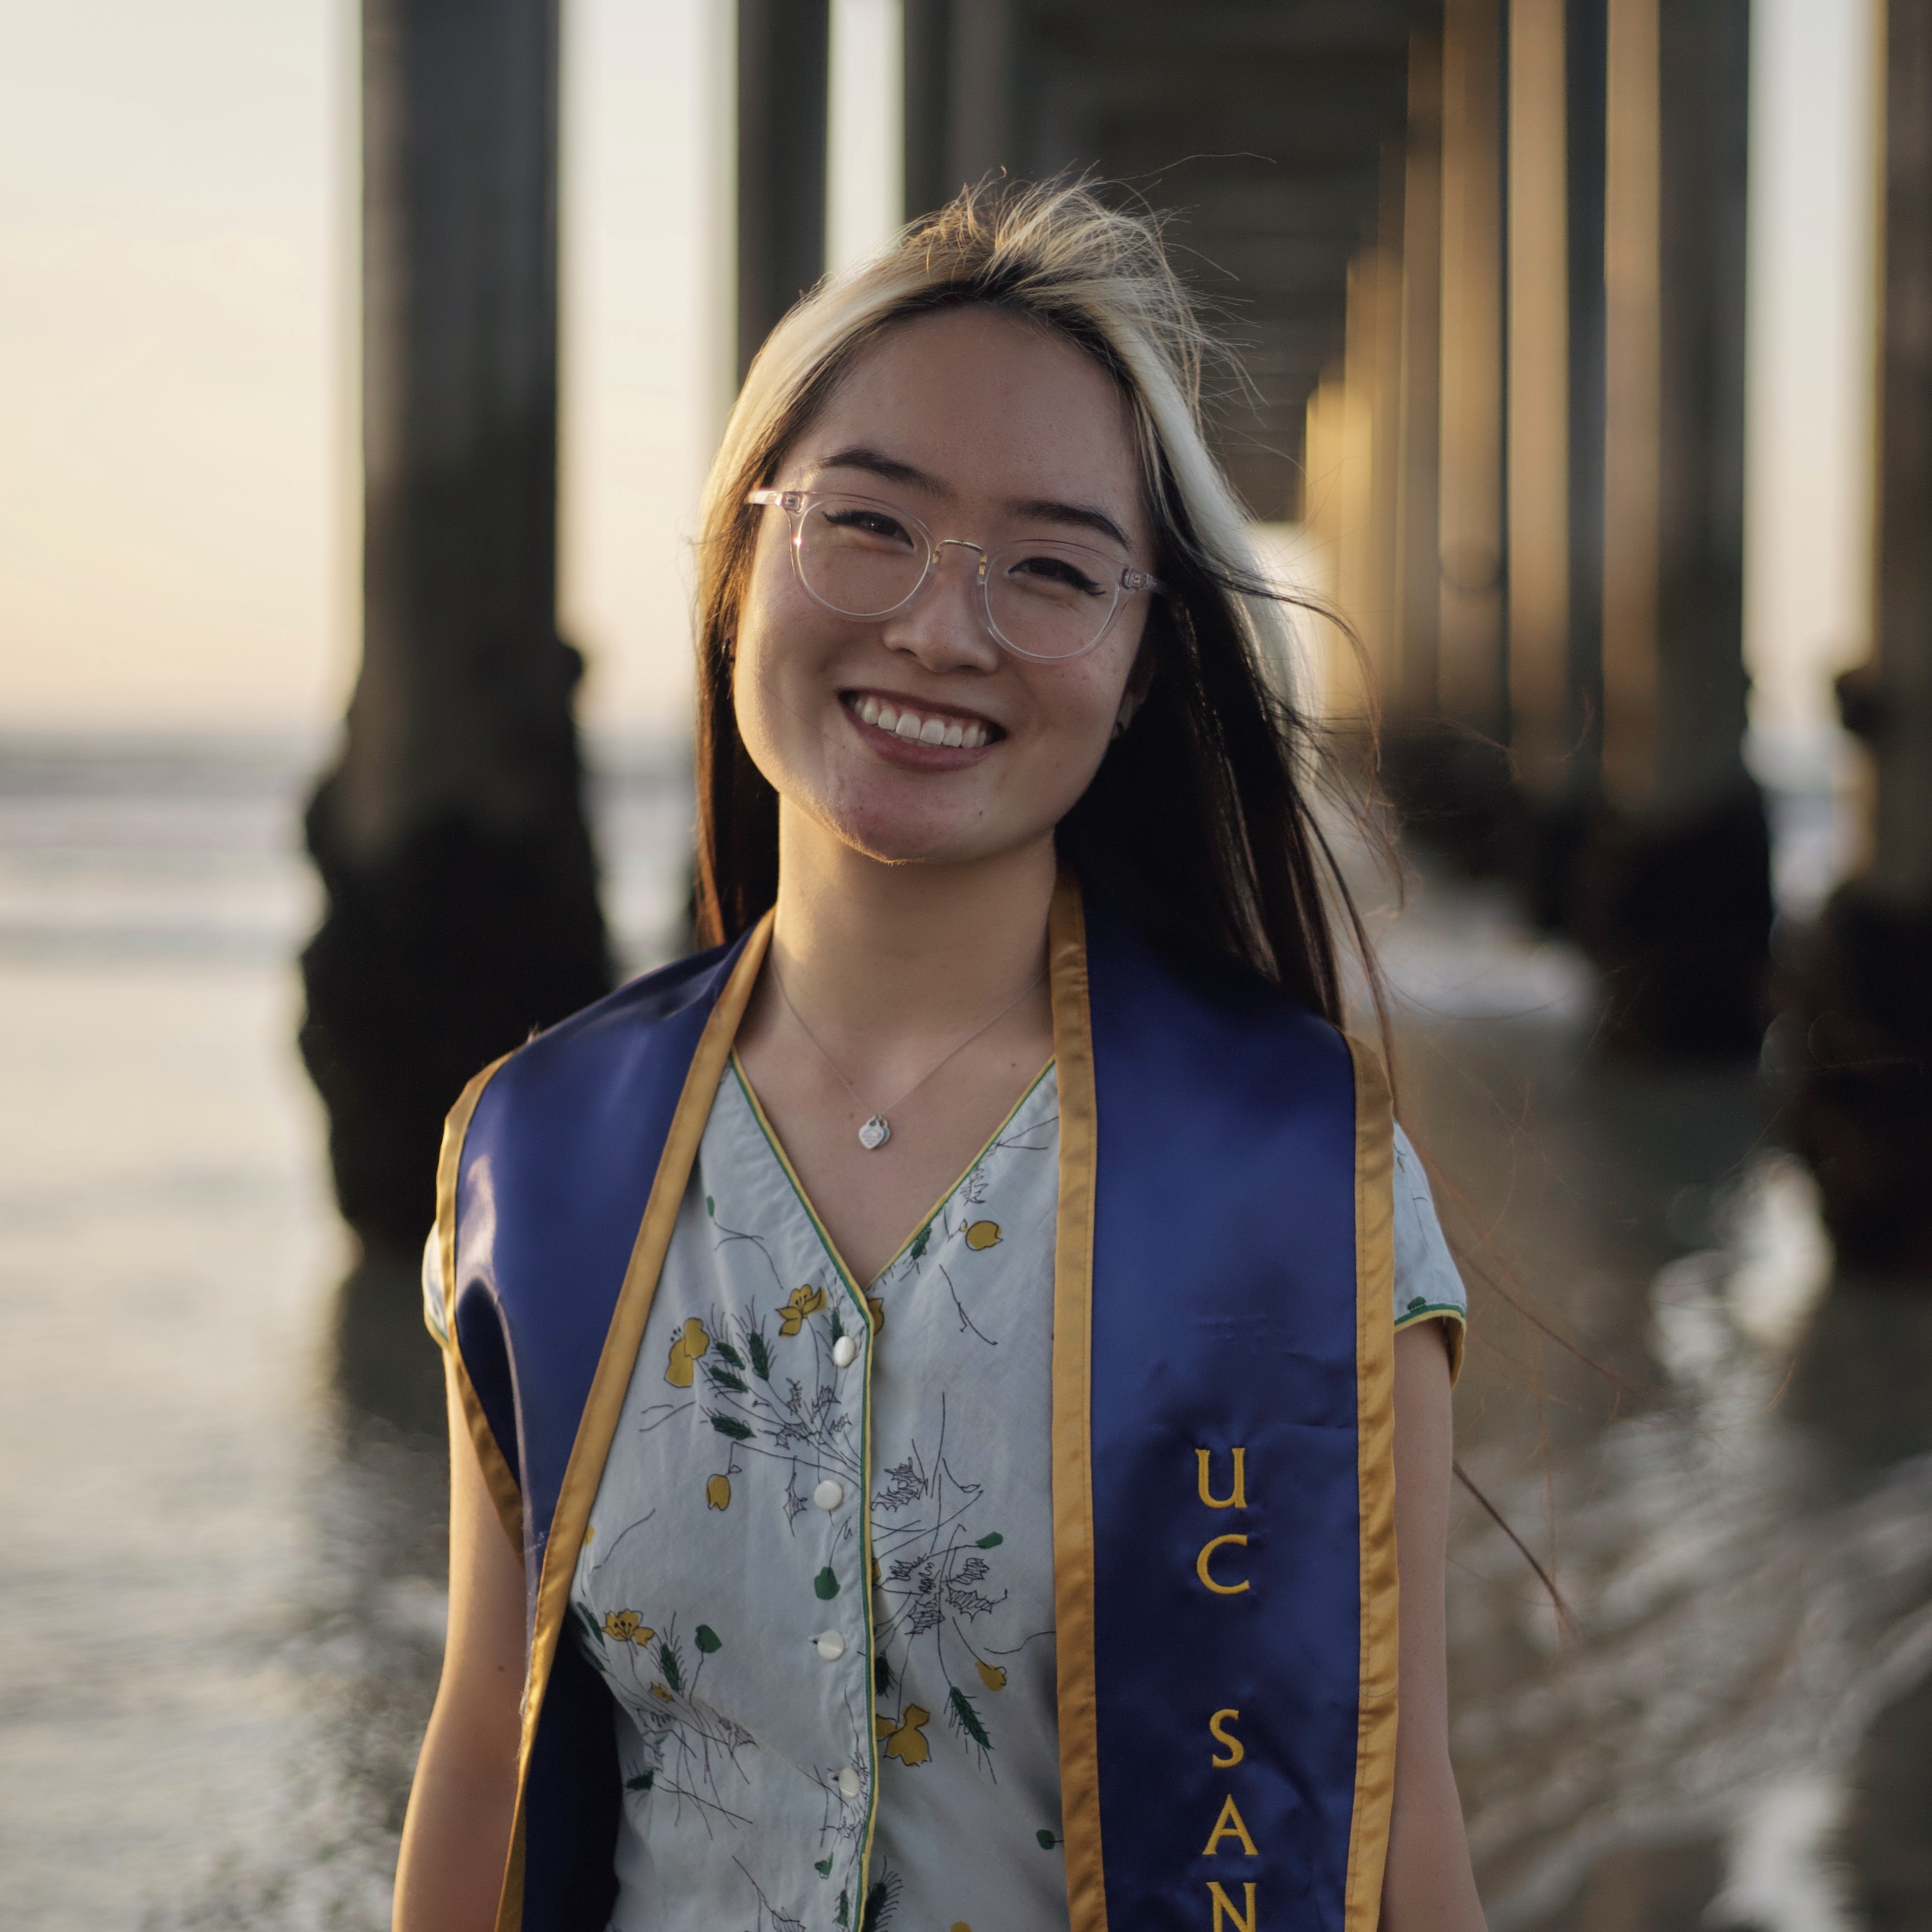 Graduation picture of Kendall smiling in front of the ocean